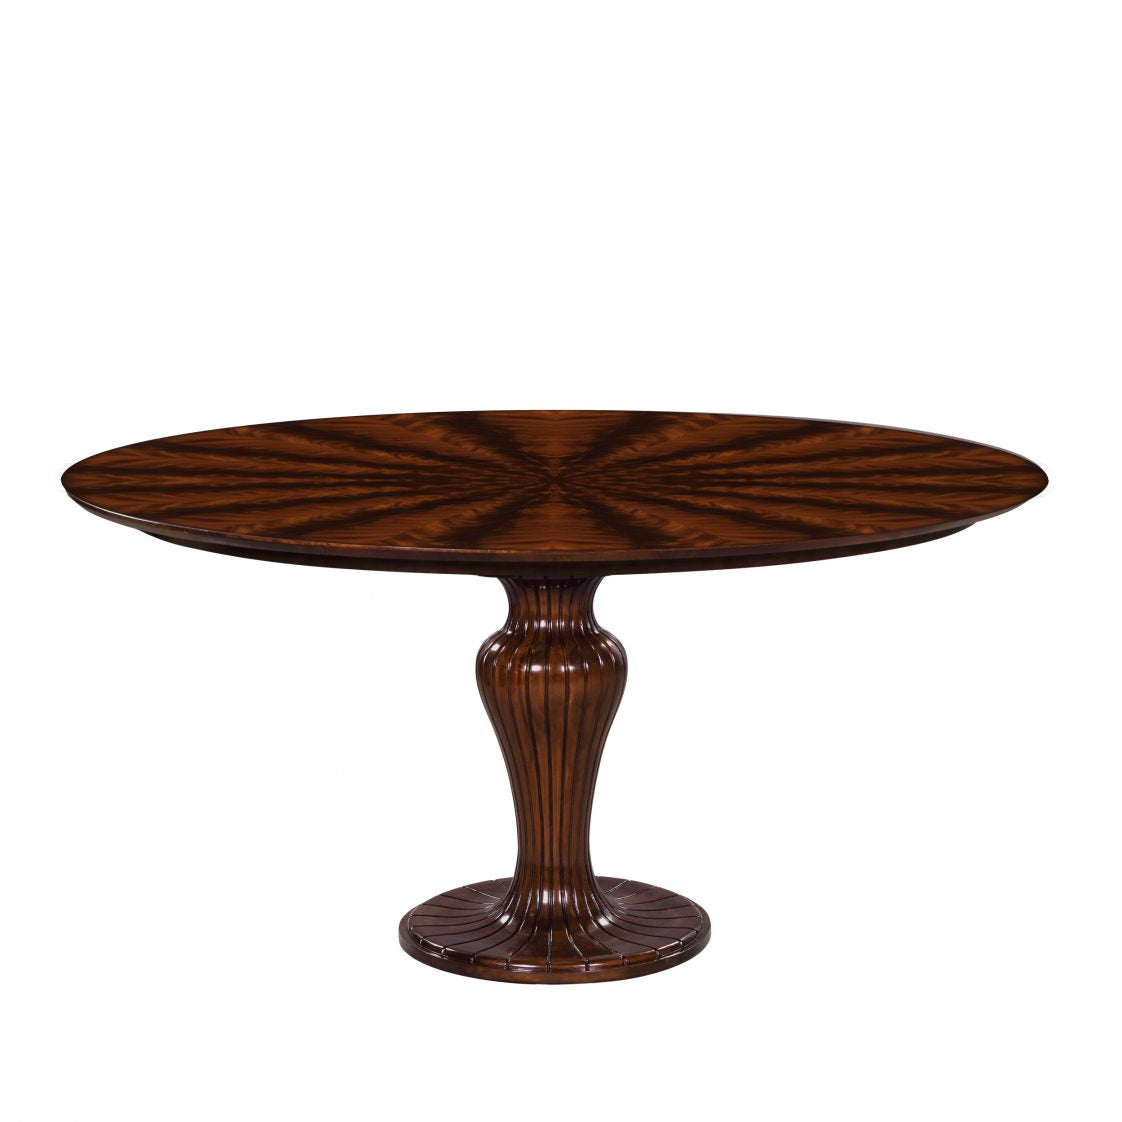 Art Deco Round Dining Table - Mahogany Flamee Wood